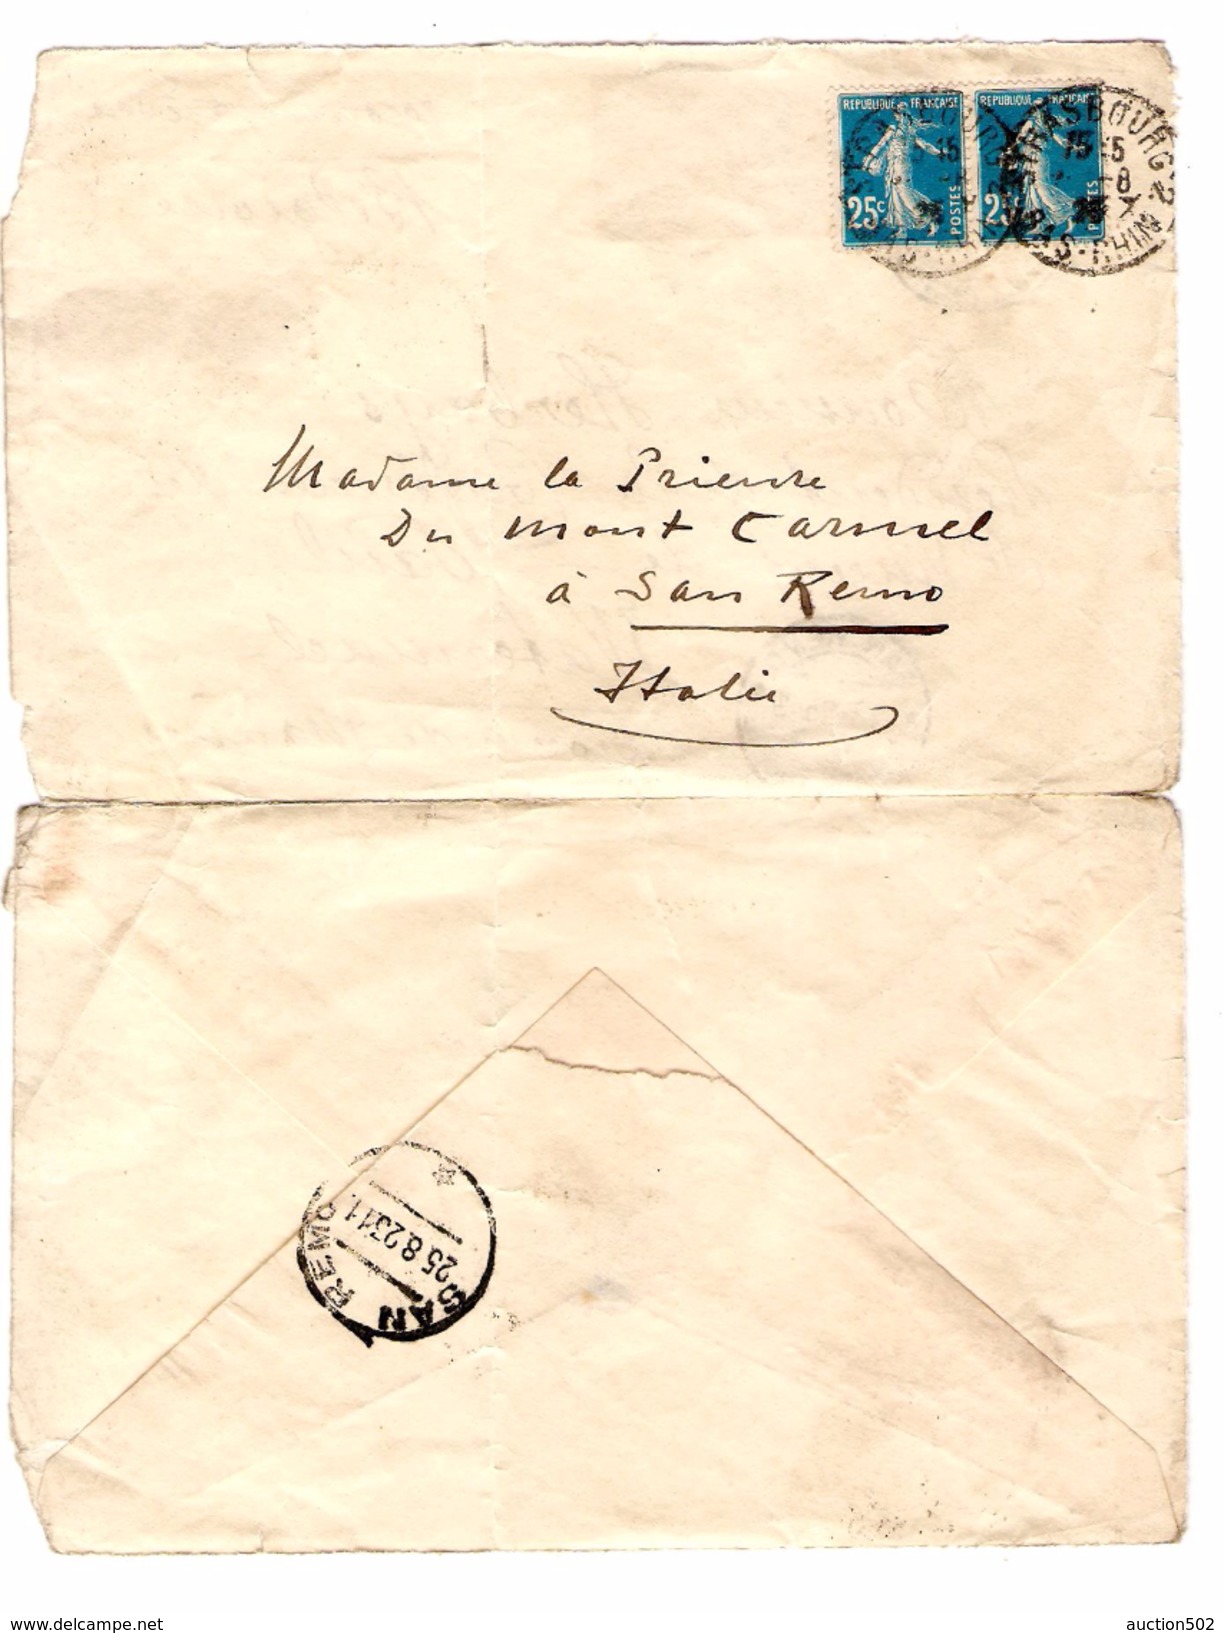 Enveloppe Used Twice France Strasbourg To San Remo 1923 & San Remo Italiy Registered 1/9/25 To Belgium Scarce PR4518 - Marcophilie